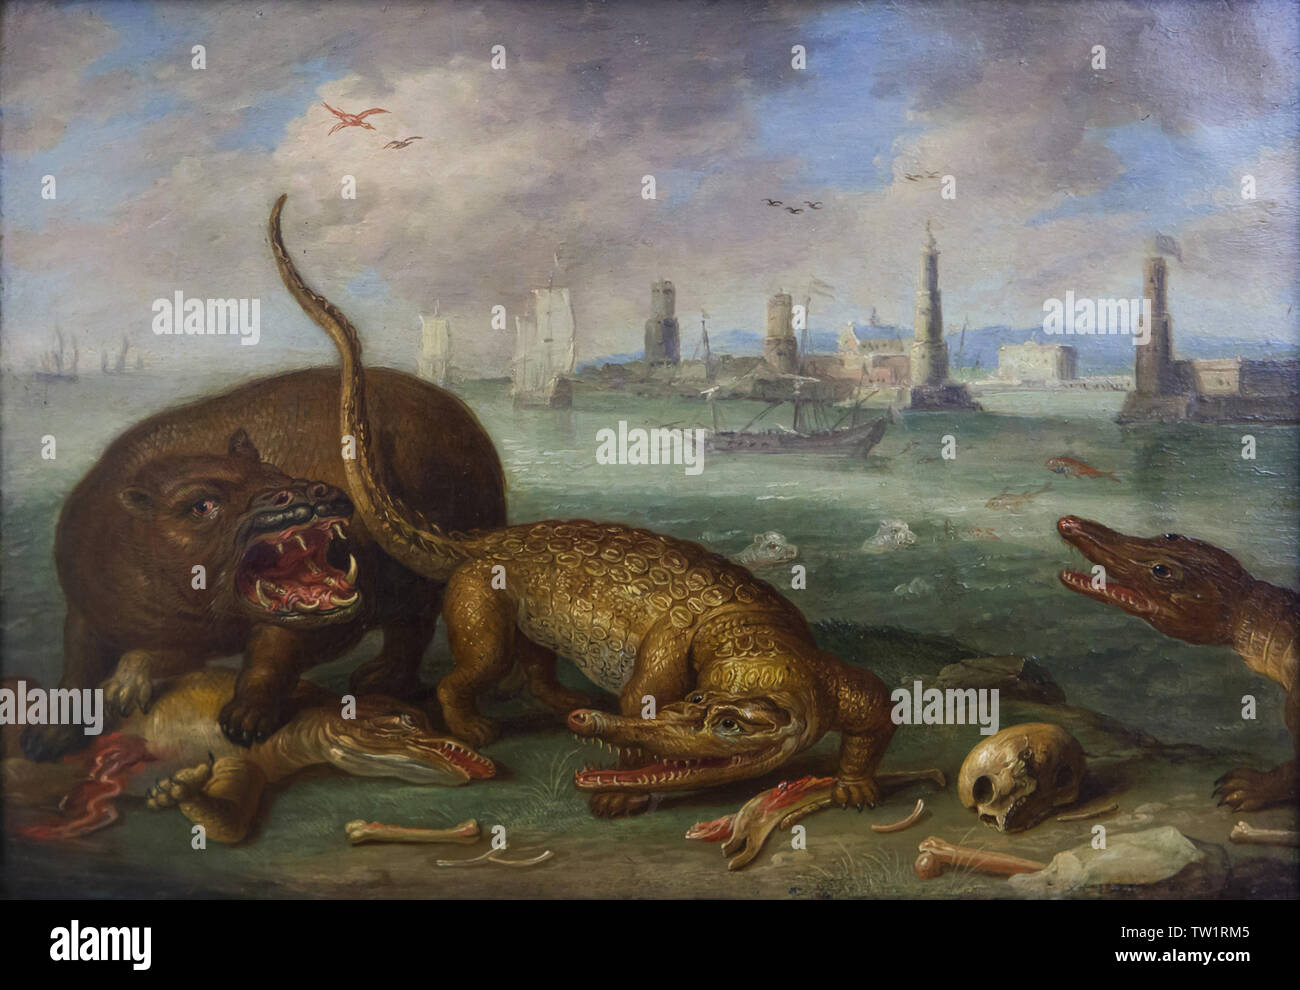 Hippopotamus fighting with American alligators or Nile crocodiles depicted in the detail devoted to Havana in the painting 'Americas' from the series of paintings 'Four Continents' by Flemish painter Jan van Kessel the Elder (1666) on display in the Alte Pinakothek in Munich, Bavaria, Germany. Stock Photo